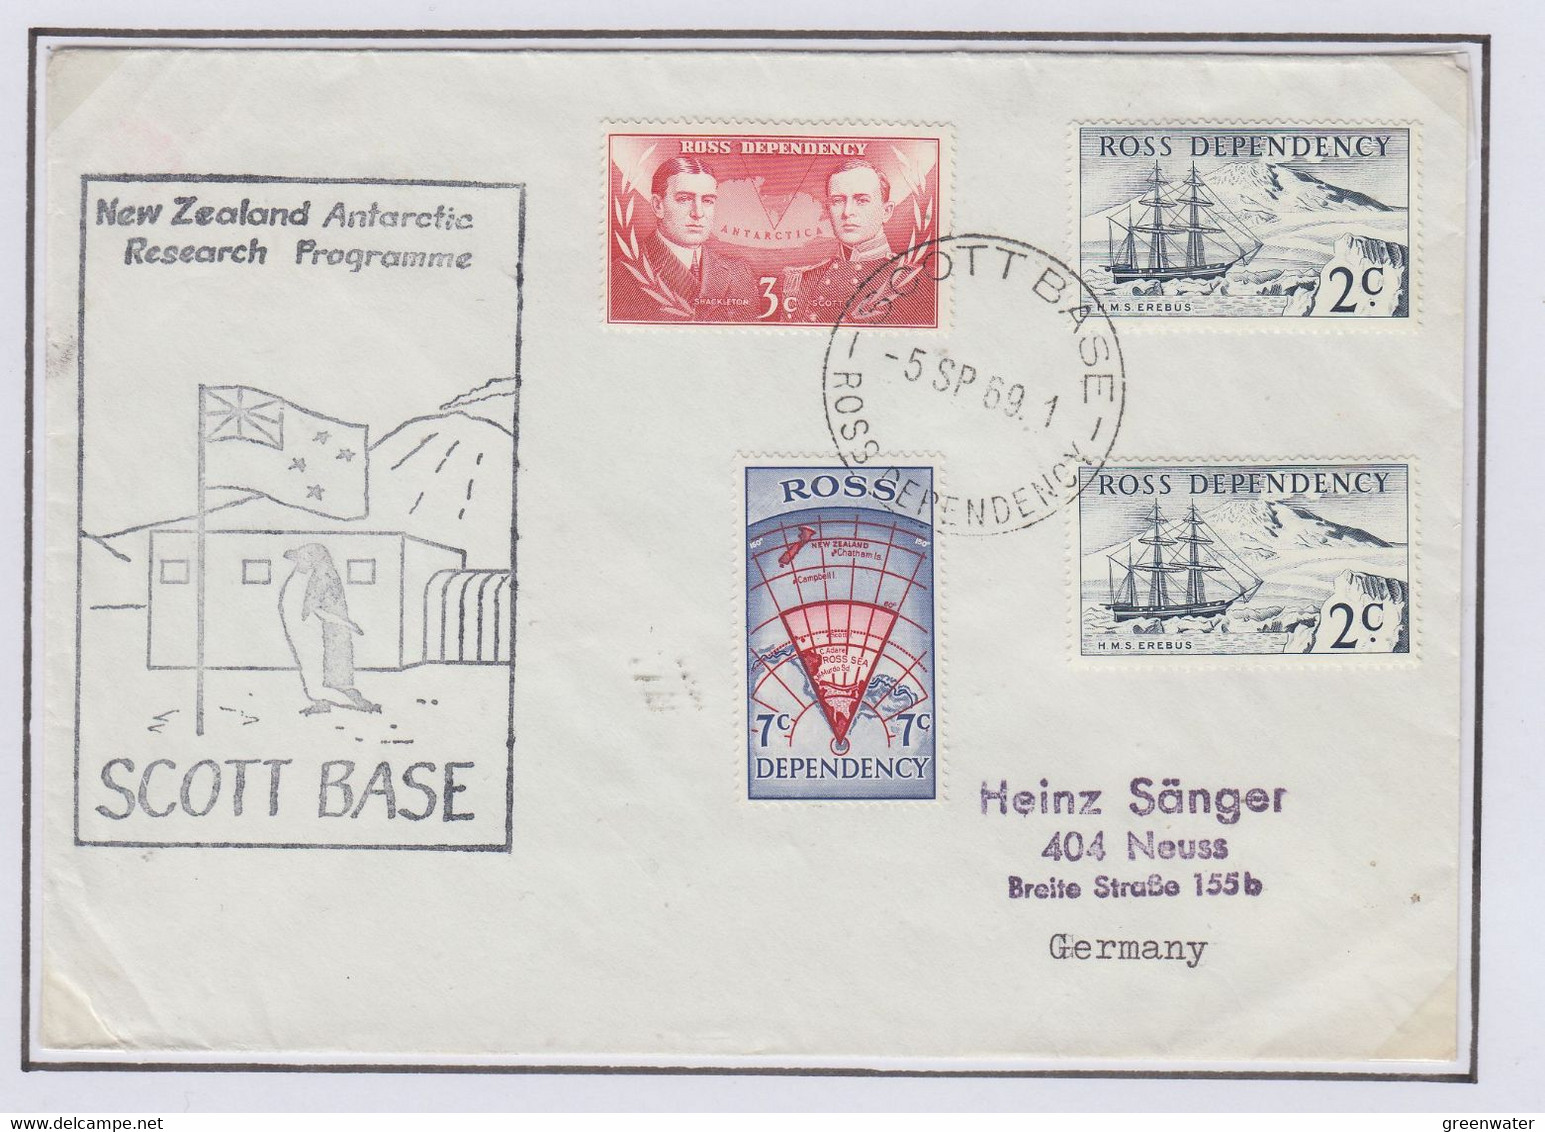 Ross Dependency 1969 Cover Scott Base Ca NZ Antarctic Research Programme Ca Scott Base 5 SP 69 (BO170) - Lettres & Documents